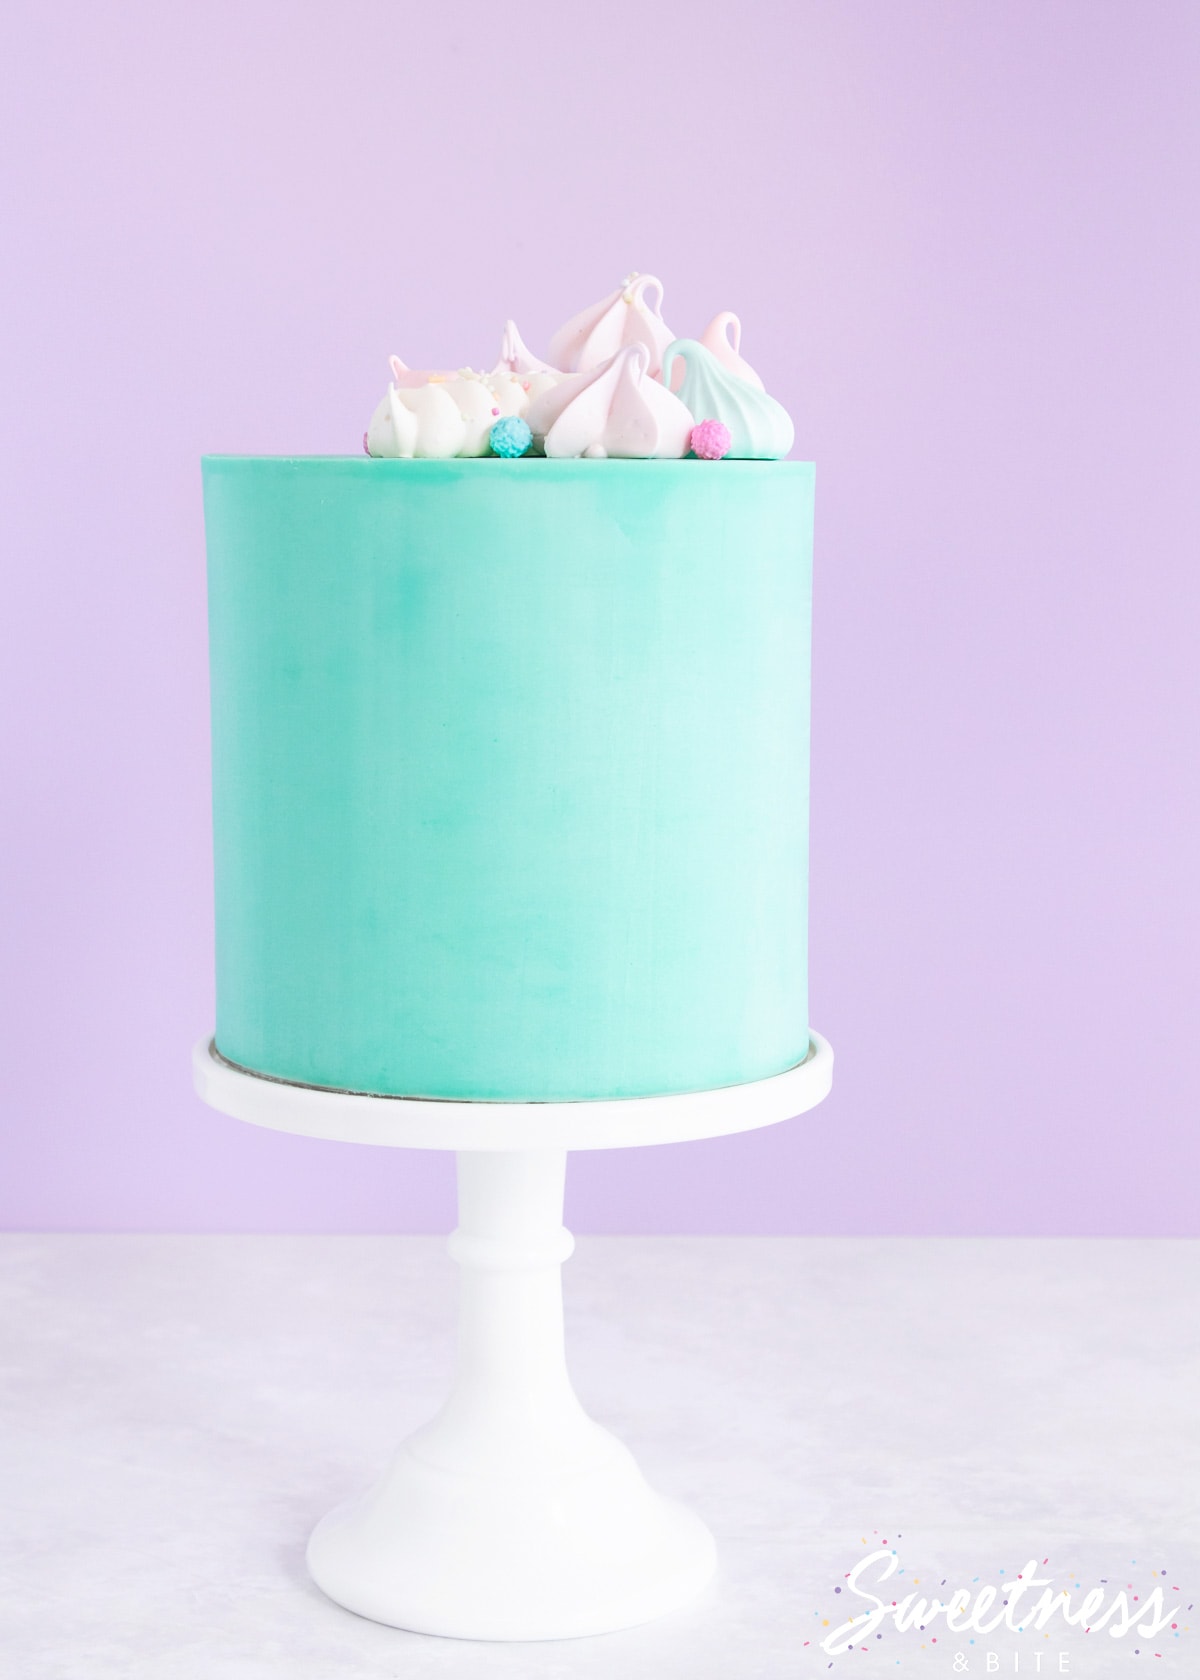 A cake covered in teal ganache on a white cake stand, topped with pastel coloured meringues.